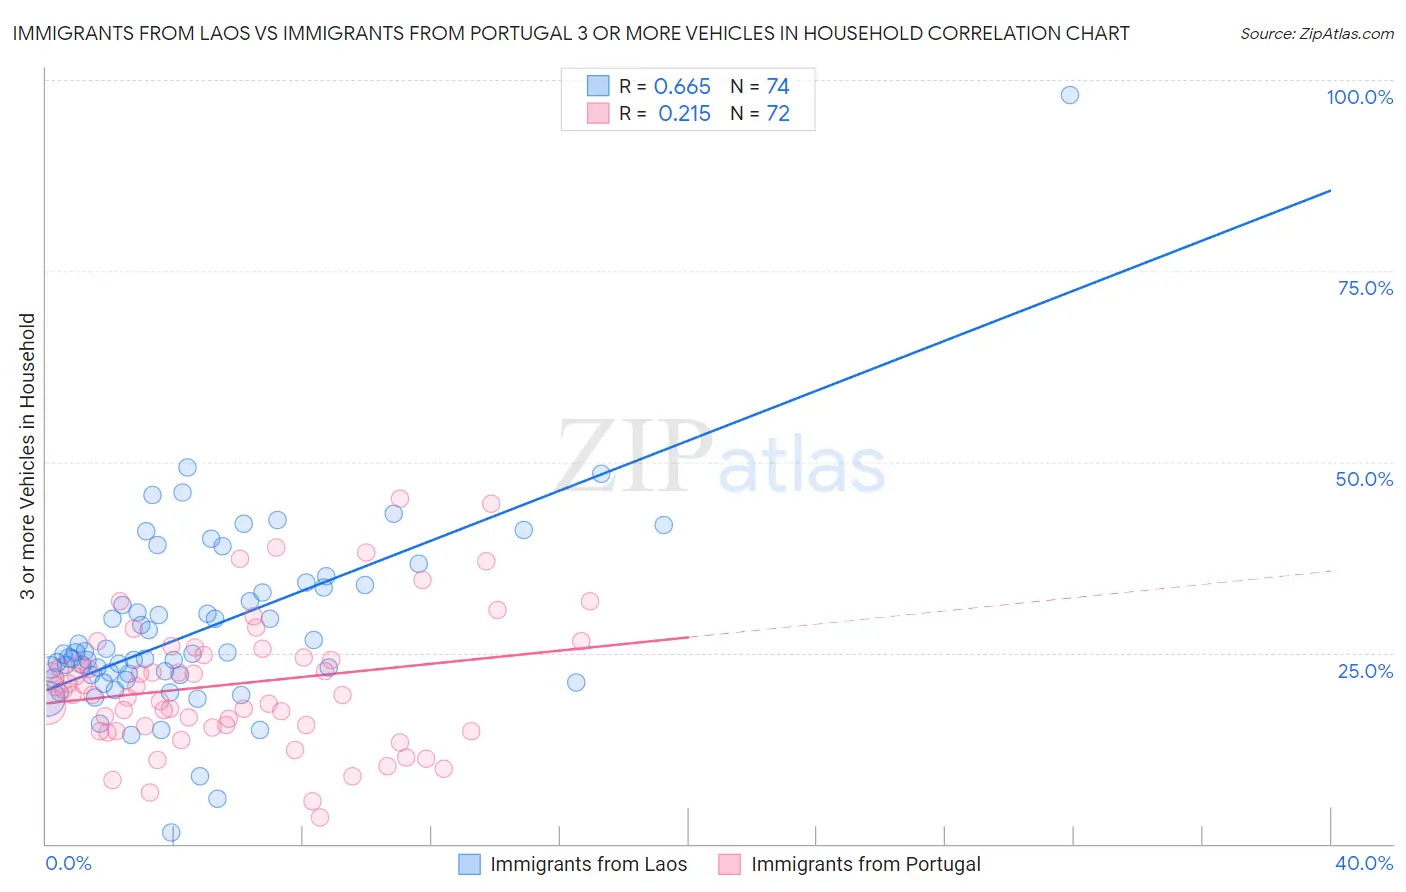 Immigrants from Laos vs Immigrants from Portugal 3 or more Vehicles in Household